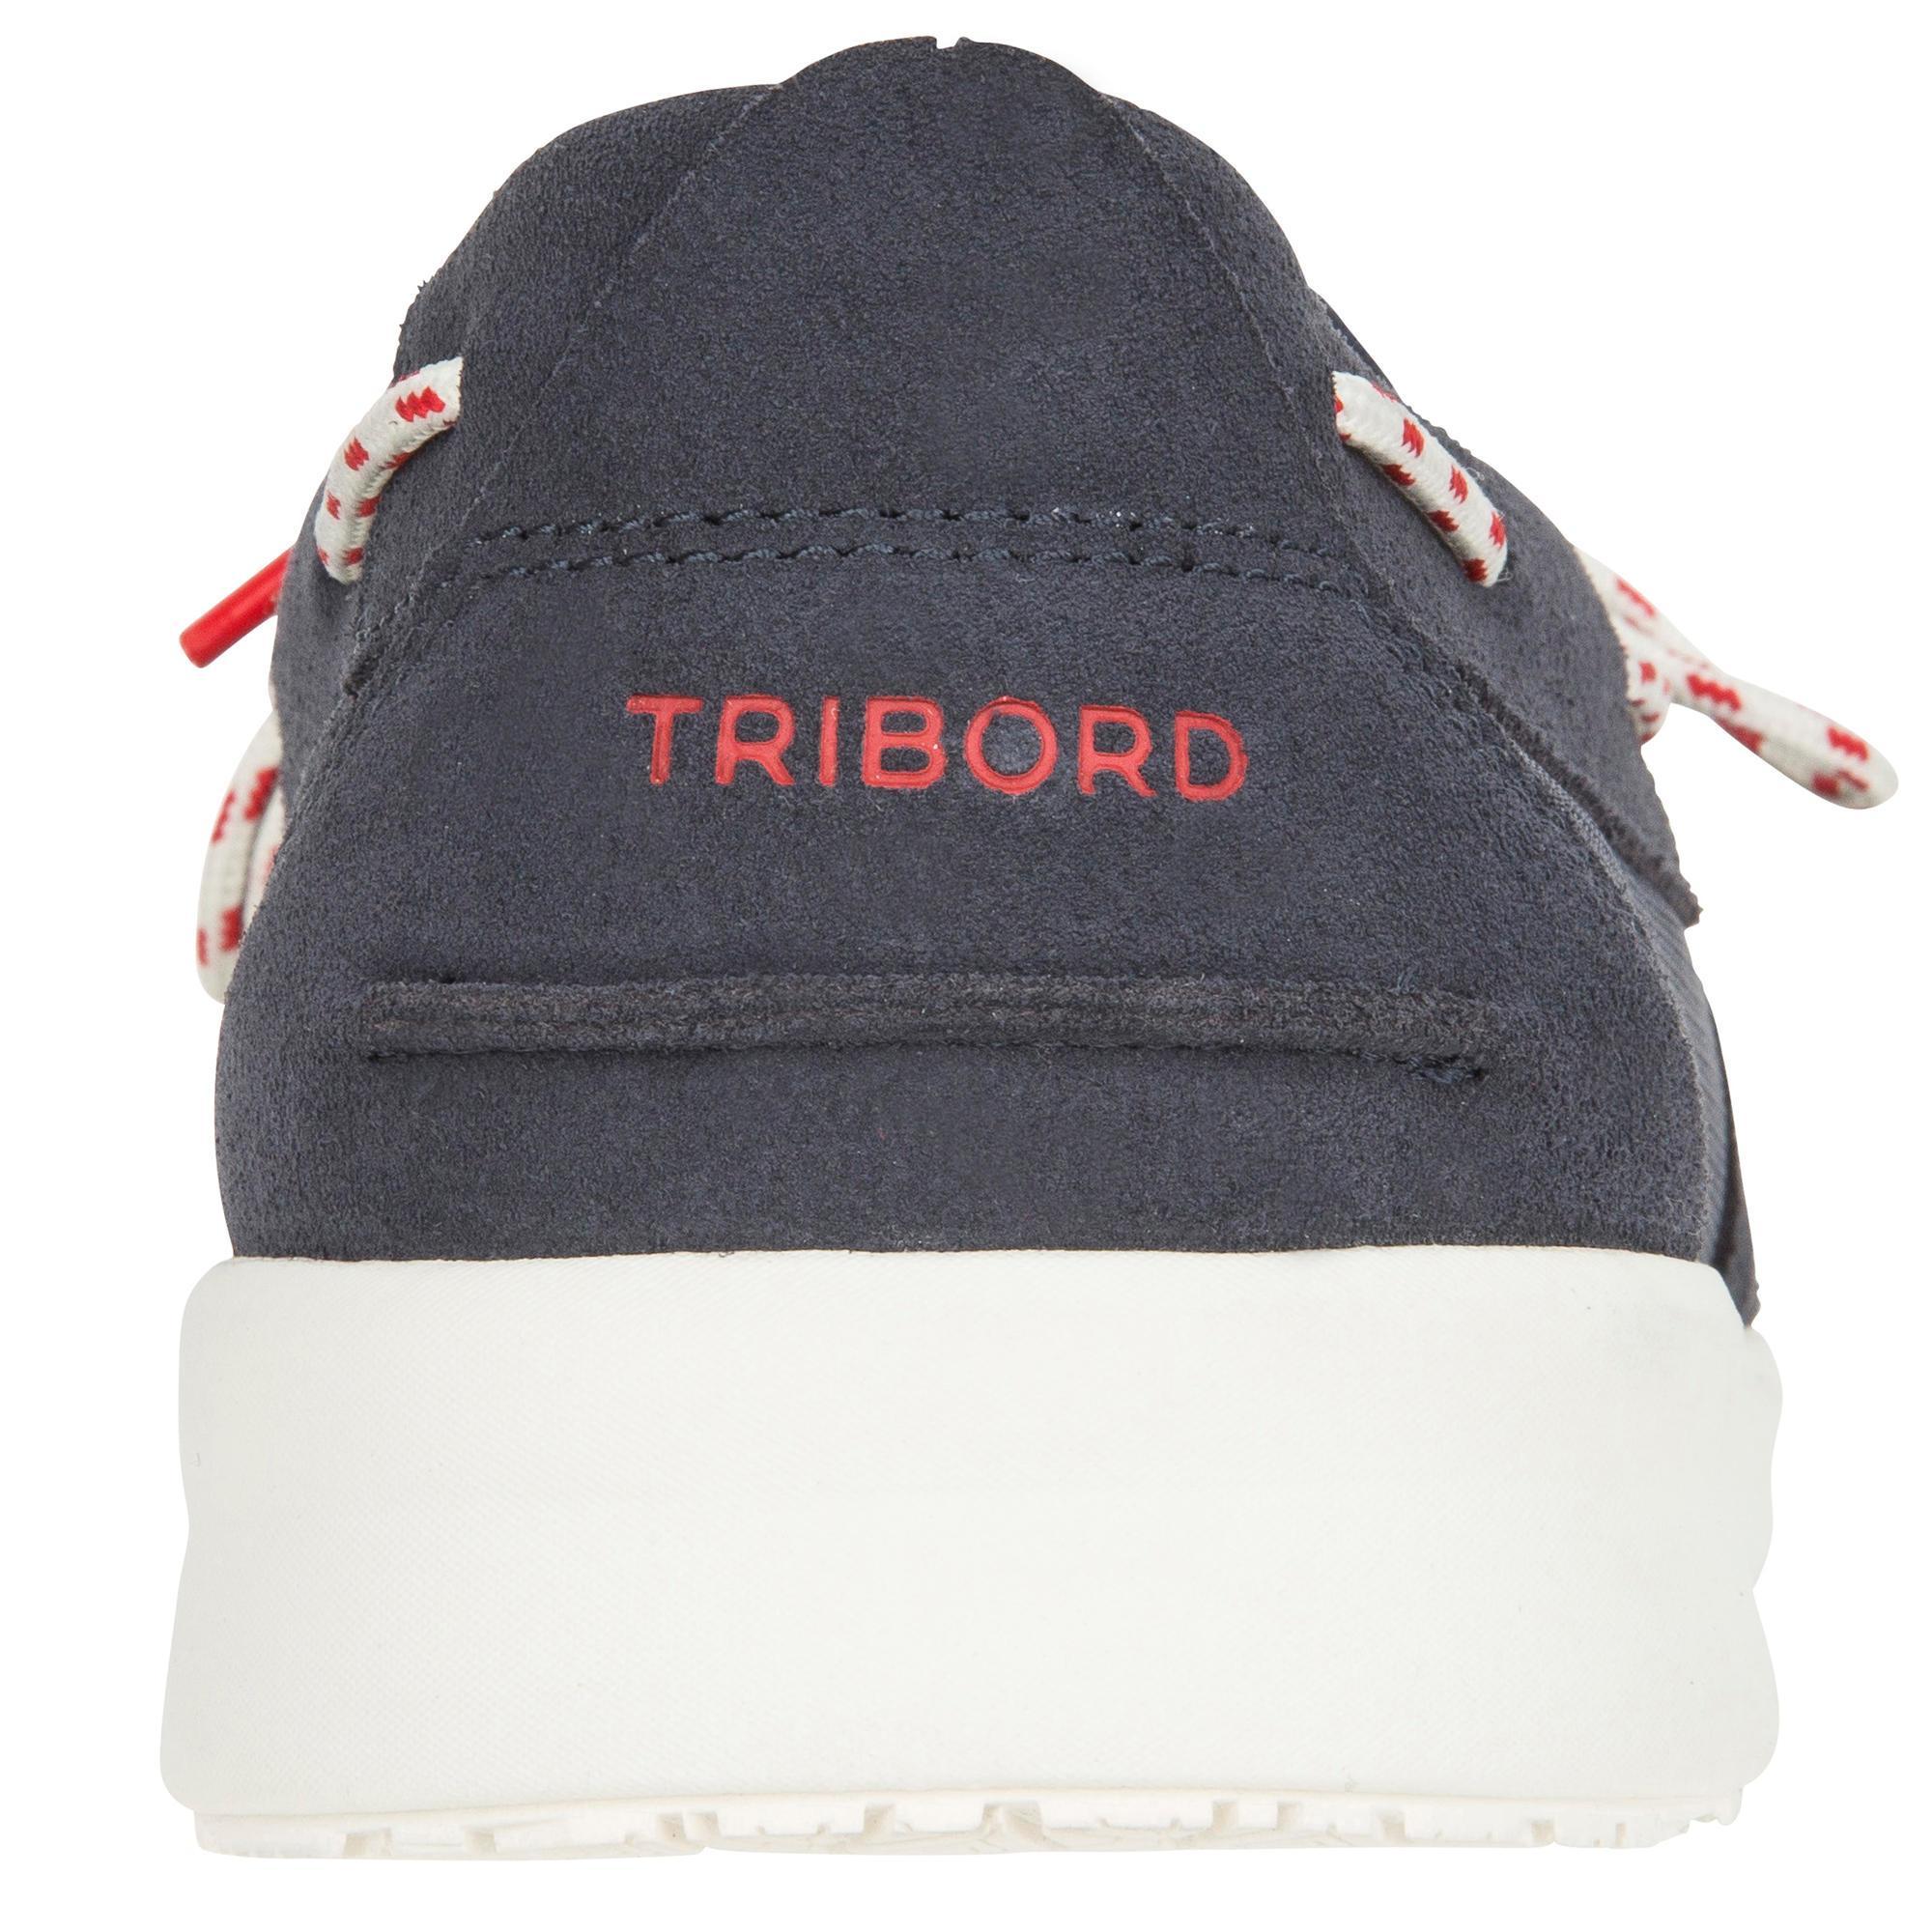 tribord boat shoes